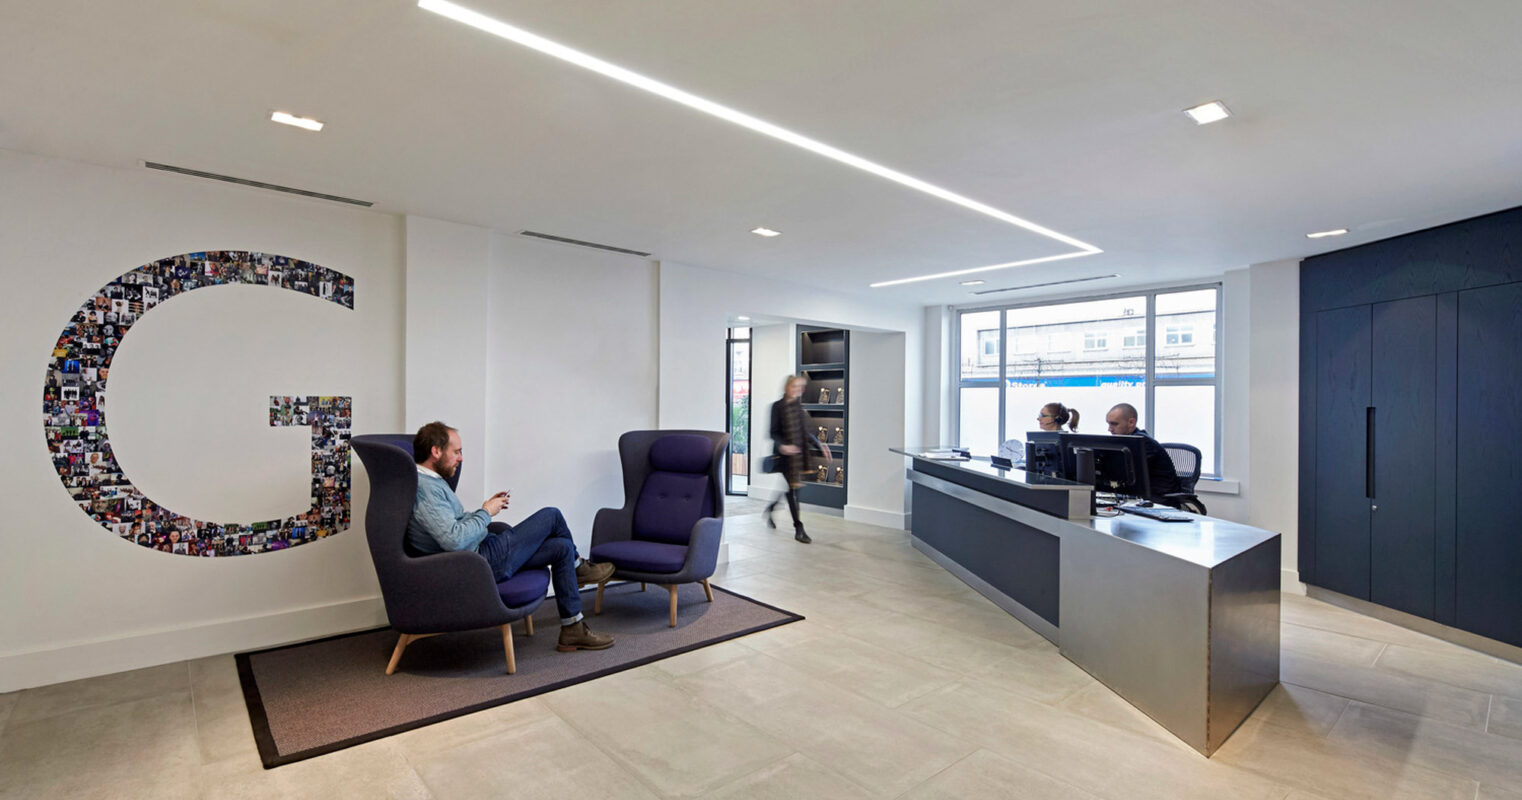 Modern office lobby with polished concrete floors, leading to a sleek reception desk. A prominent, mosaic-style company logo adorns the wall, complemented by recessed ceiling lighting and contemporary armchairs for waiting visitors.